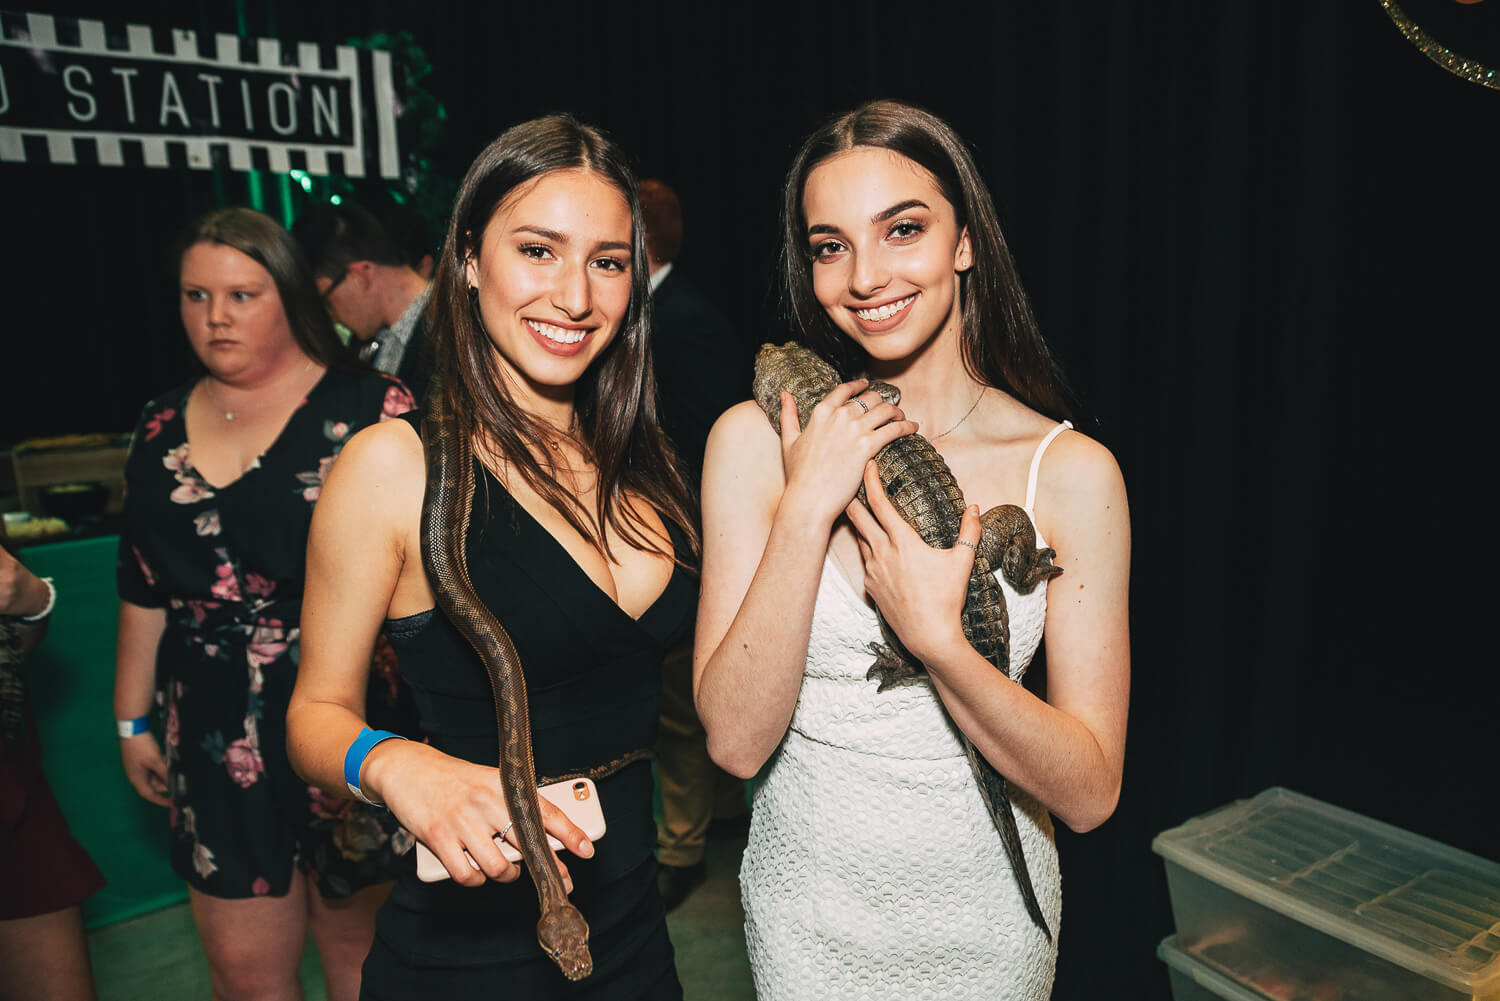 Jungle Themed Party - Snake and Croc Handling